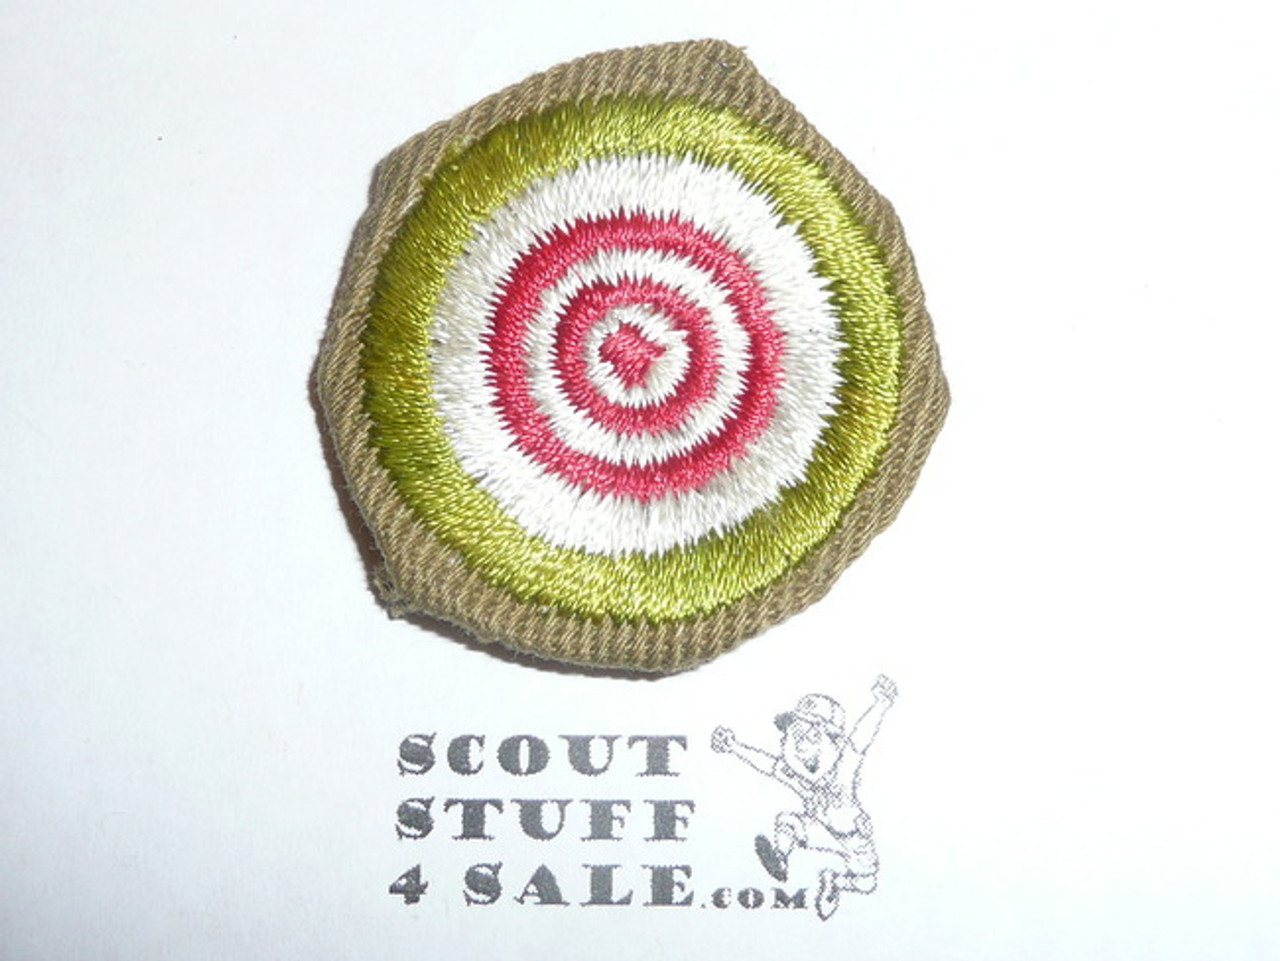 Marksmanship - Type C - Tan Crimped Merit Badge (1936-1946), was sewn but in very good condition